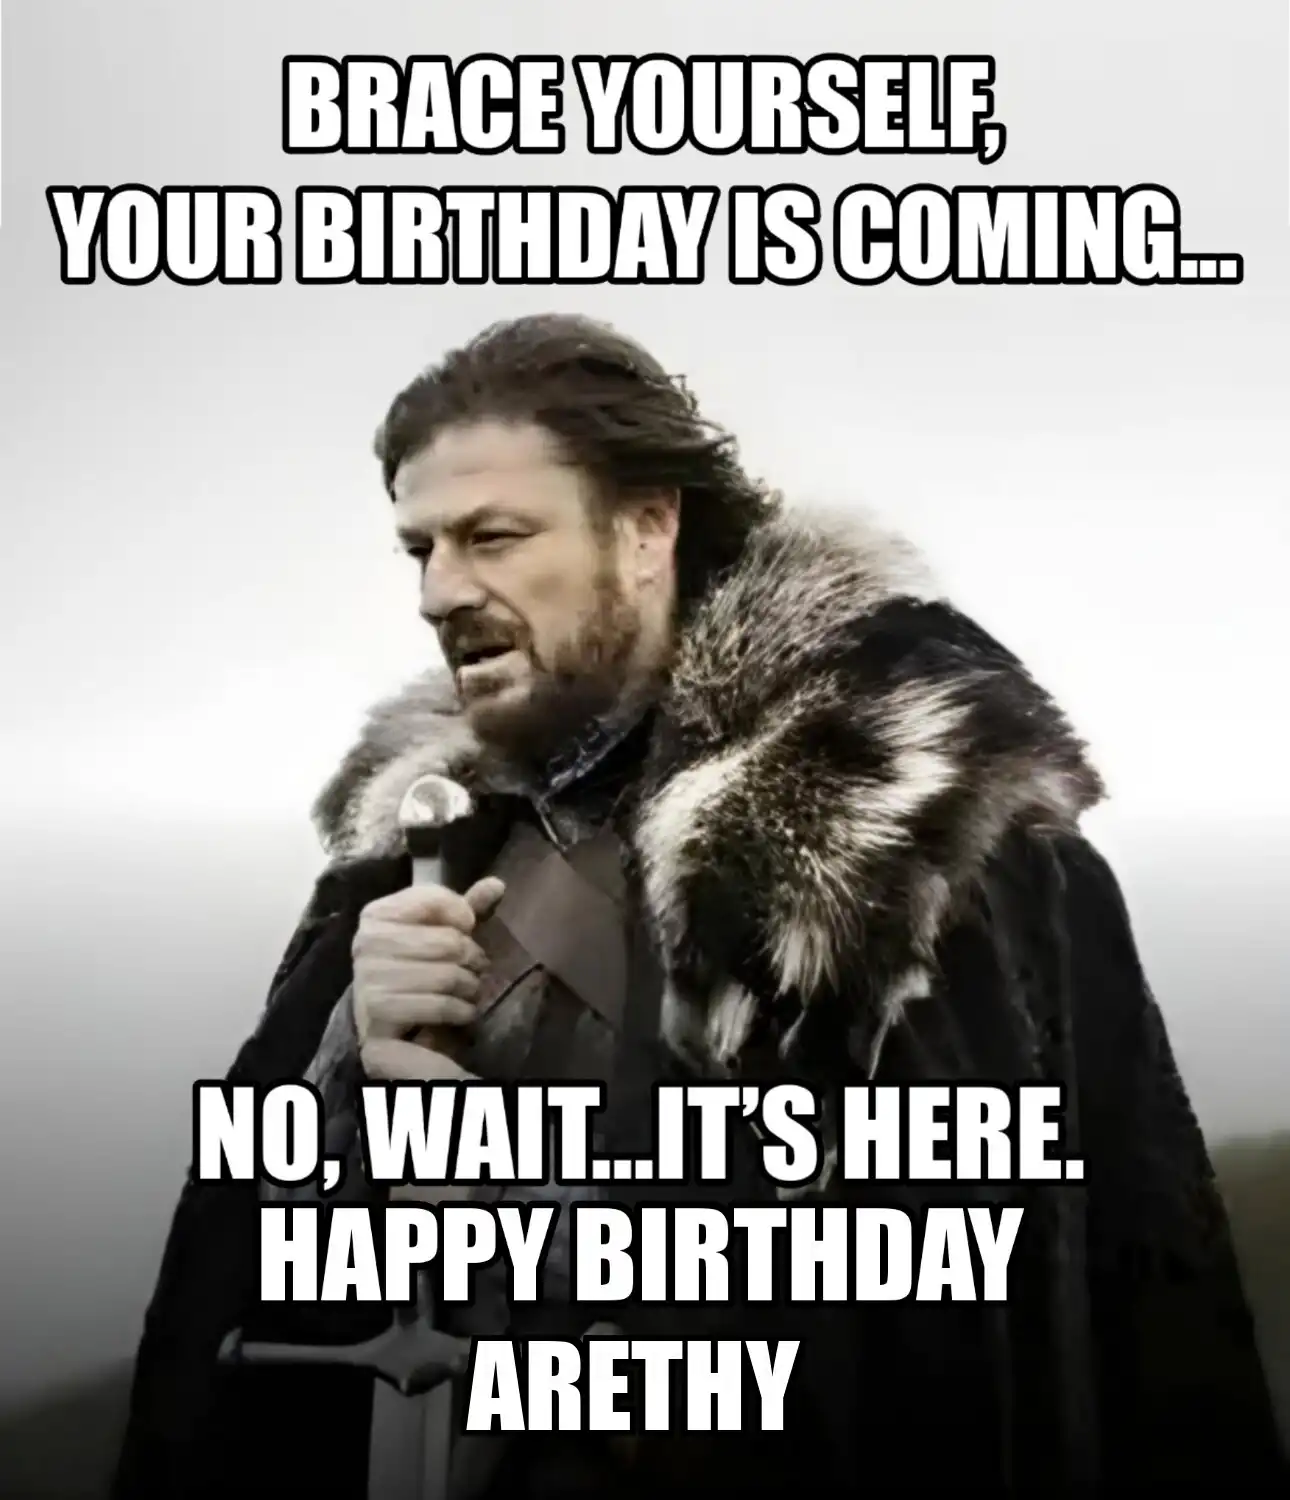 Happy Birthday Arethy Brace Yourself Your Birthday Is Coming Meme